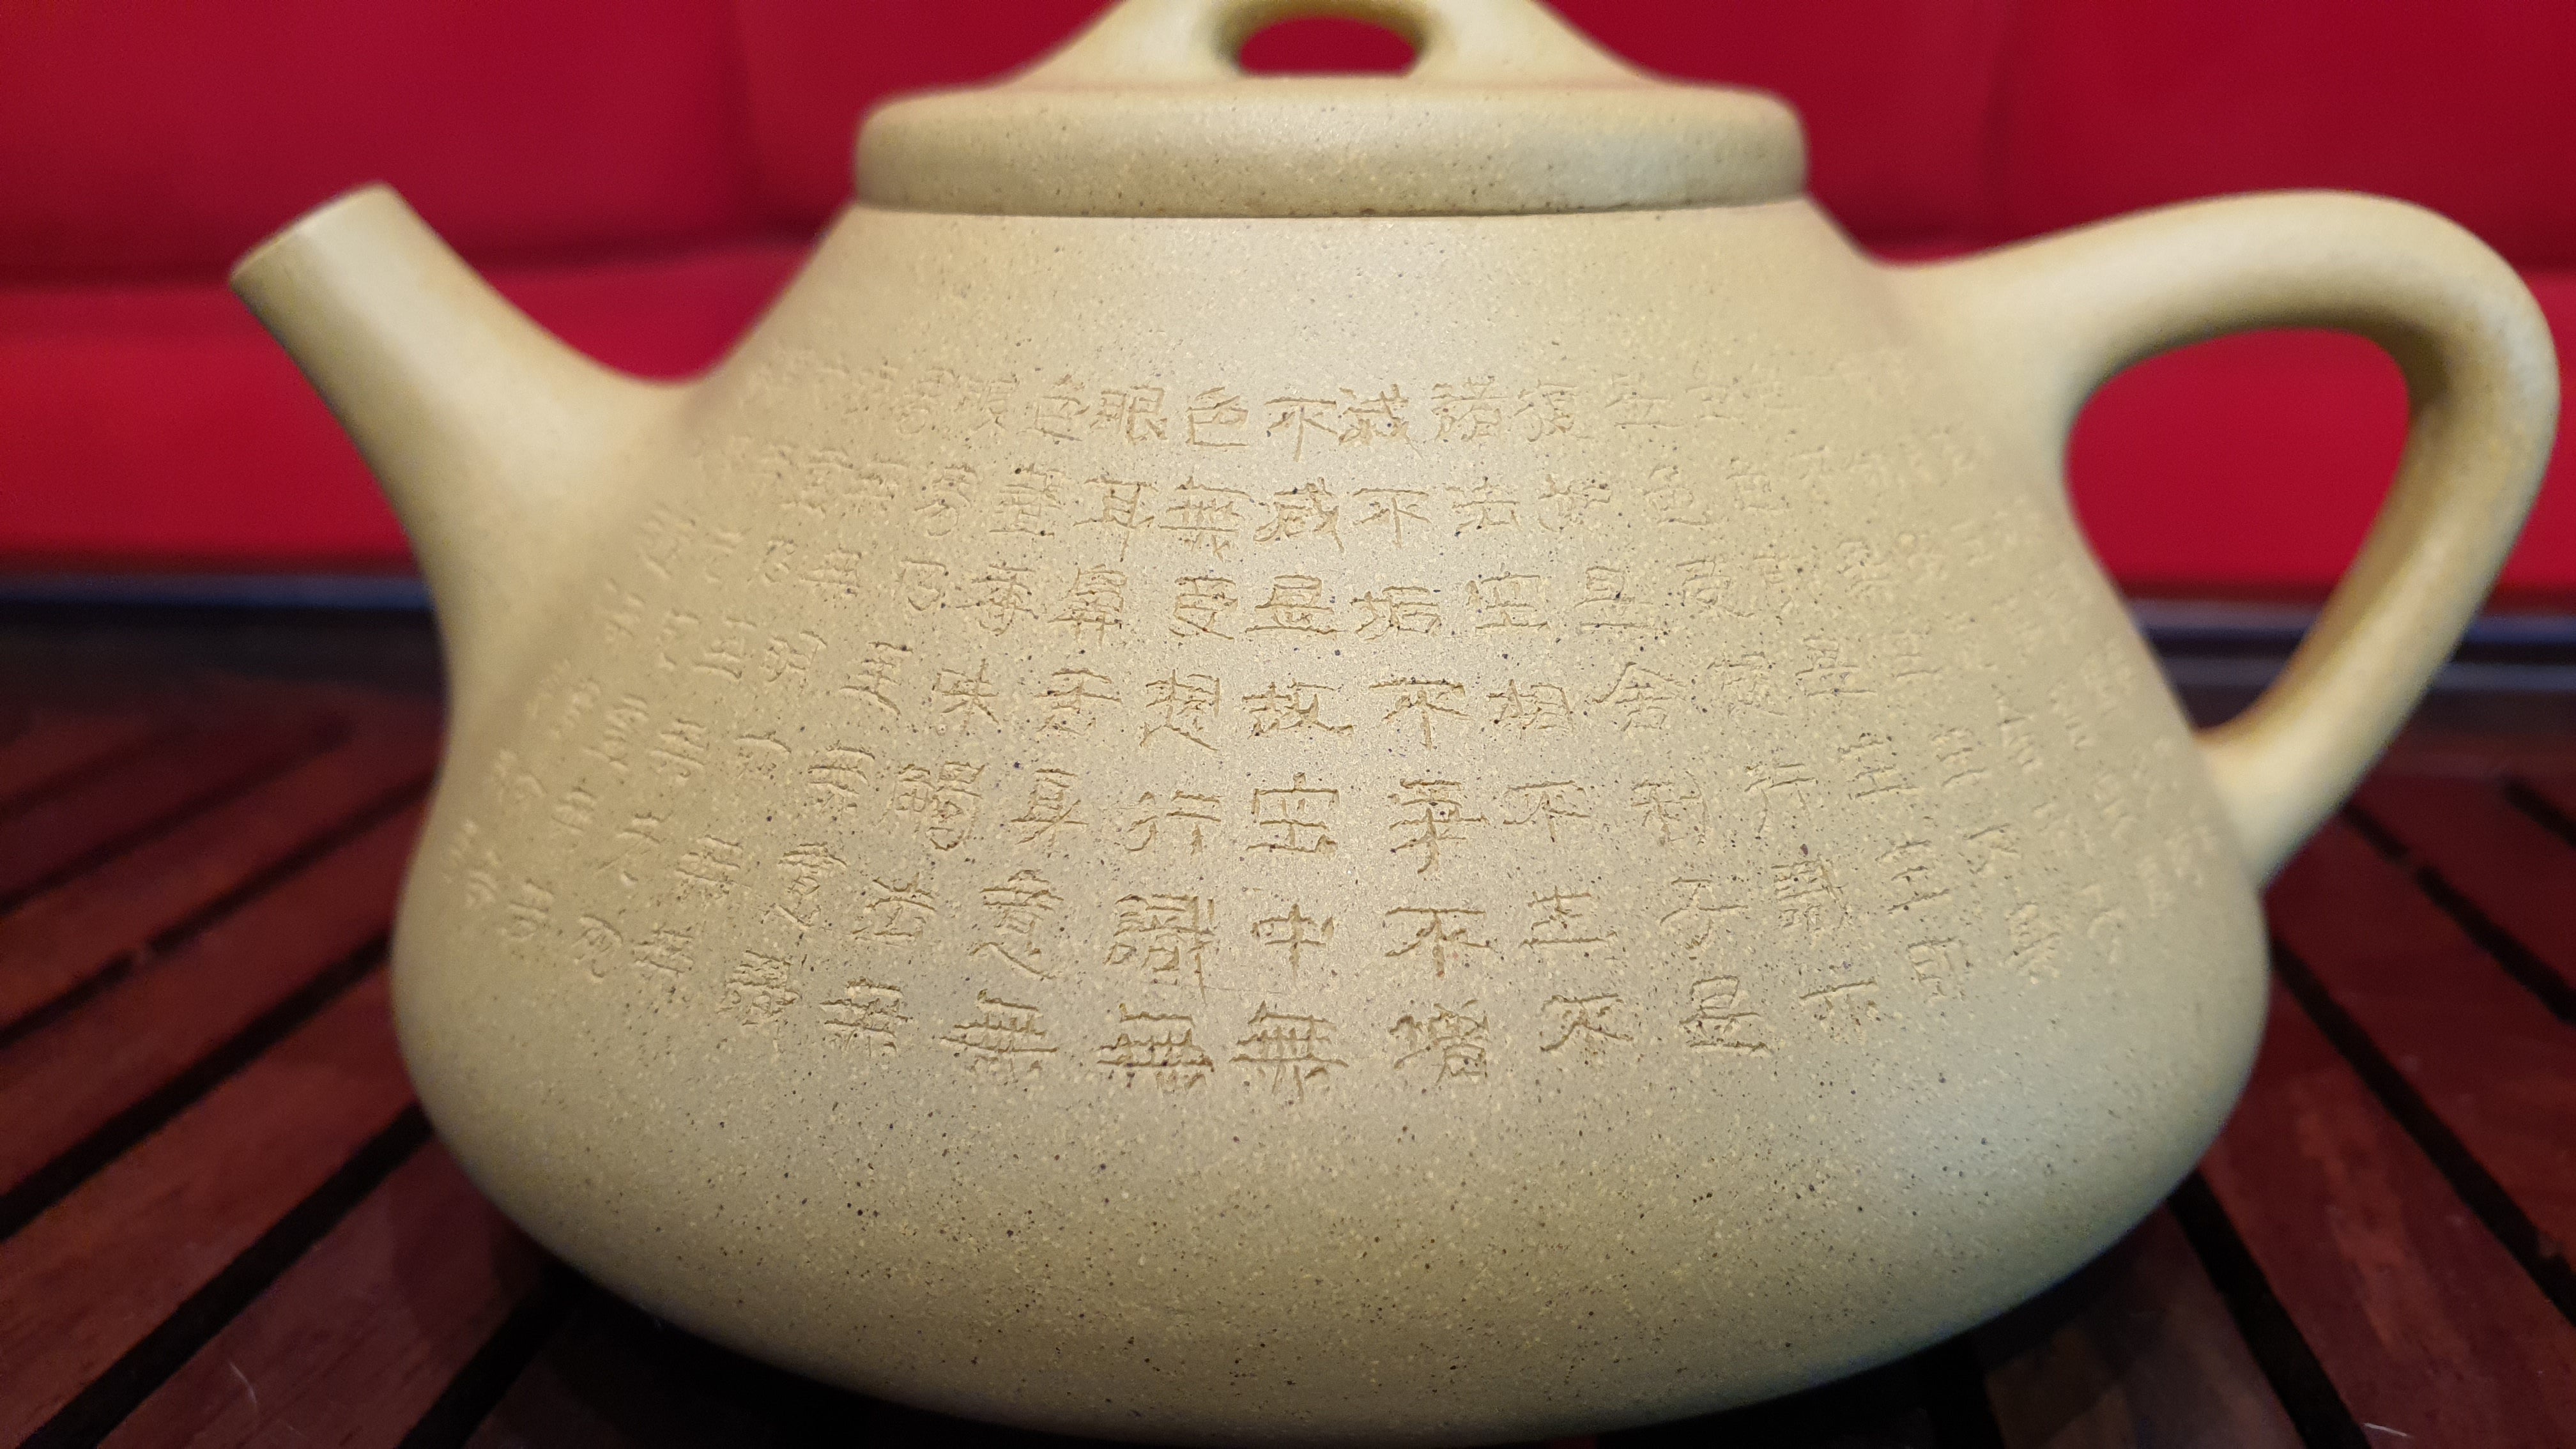 ZiYe ShiPiao 心经石瓢 with engraving of The Heart Sutra - by L2 Senior Master Artist Cao Lan Fang 曹兰芳高级工艺美术师